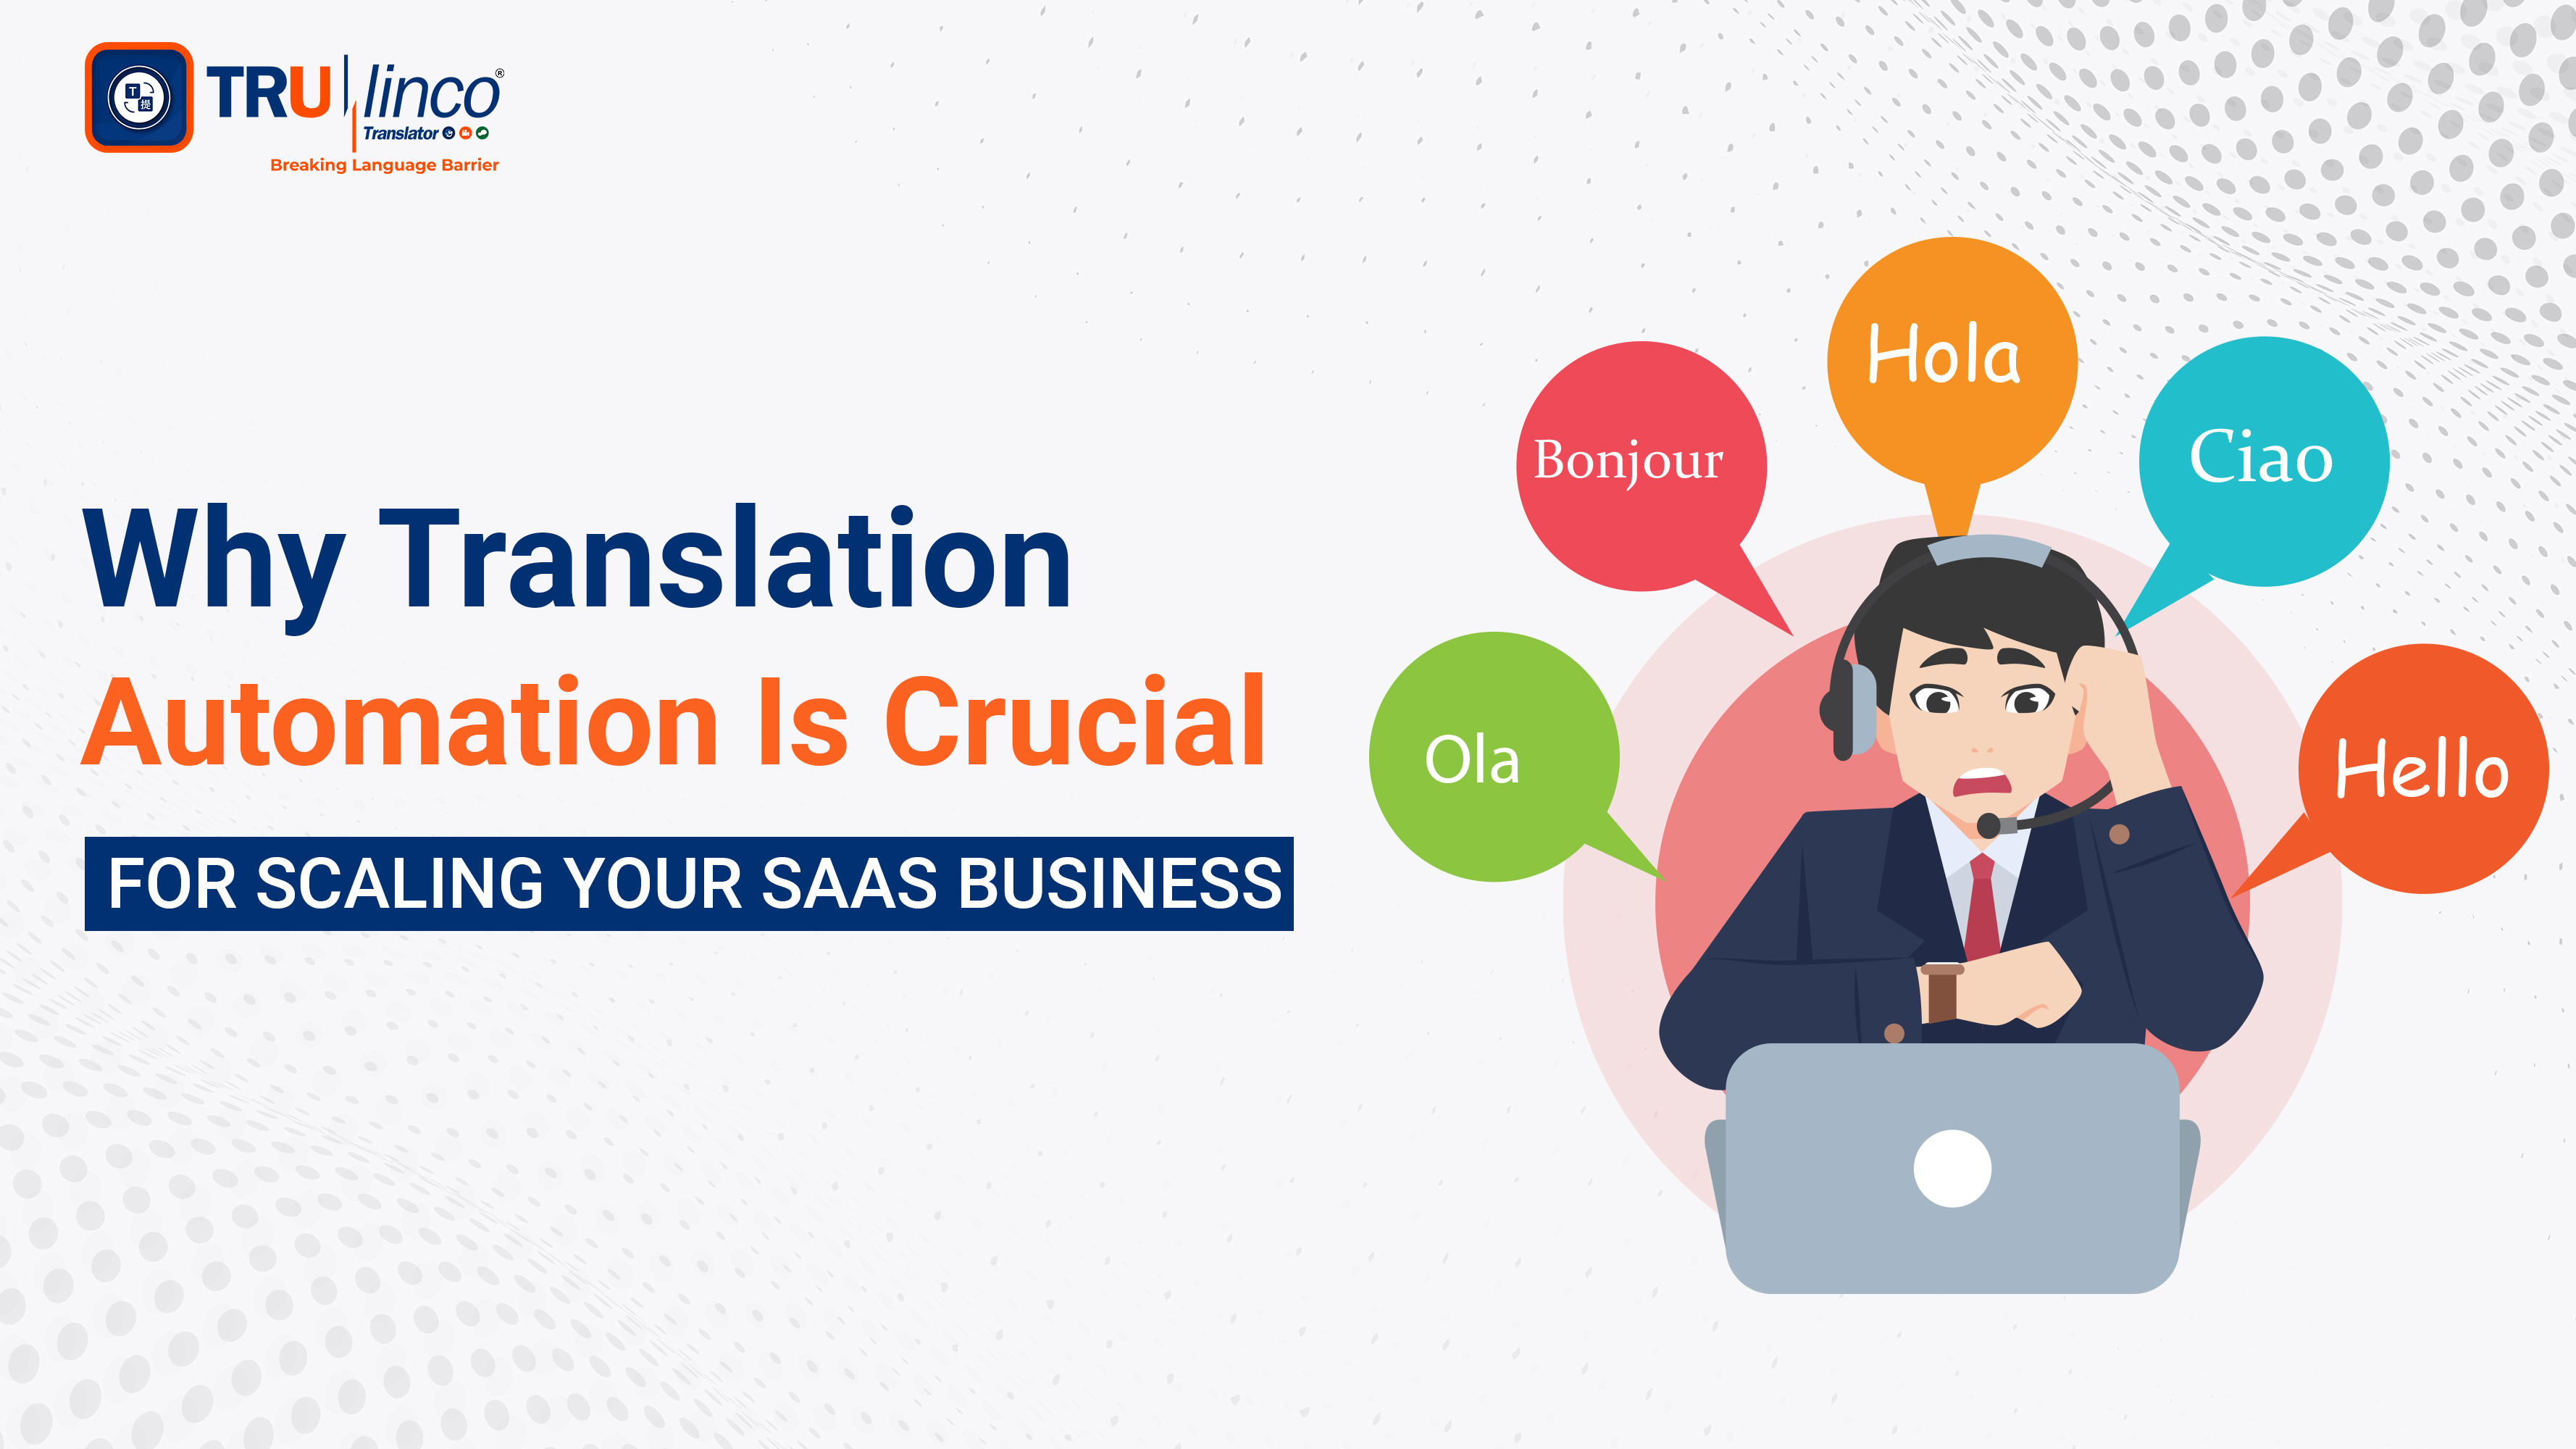 Why Translation Automation Is Crucial for Scaling Your SaaS Business